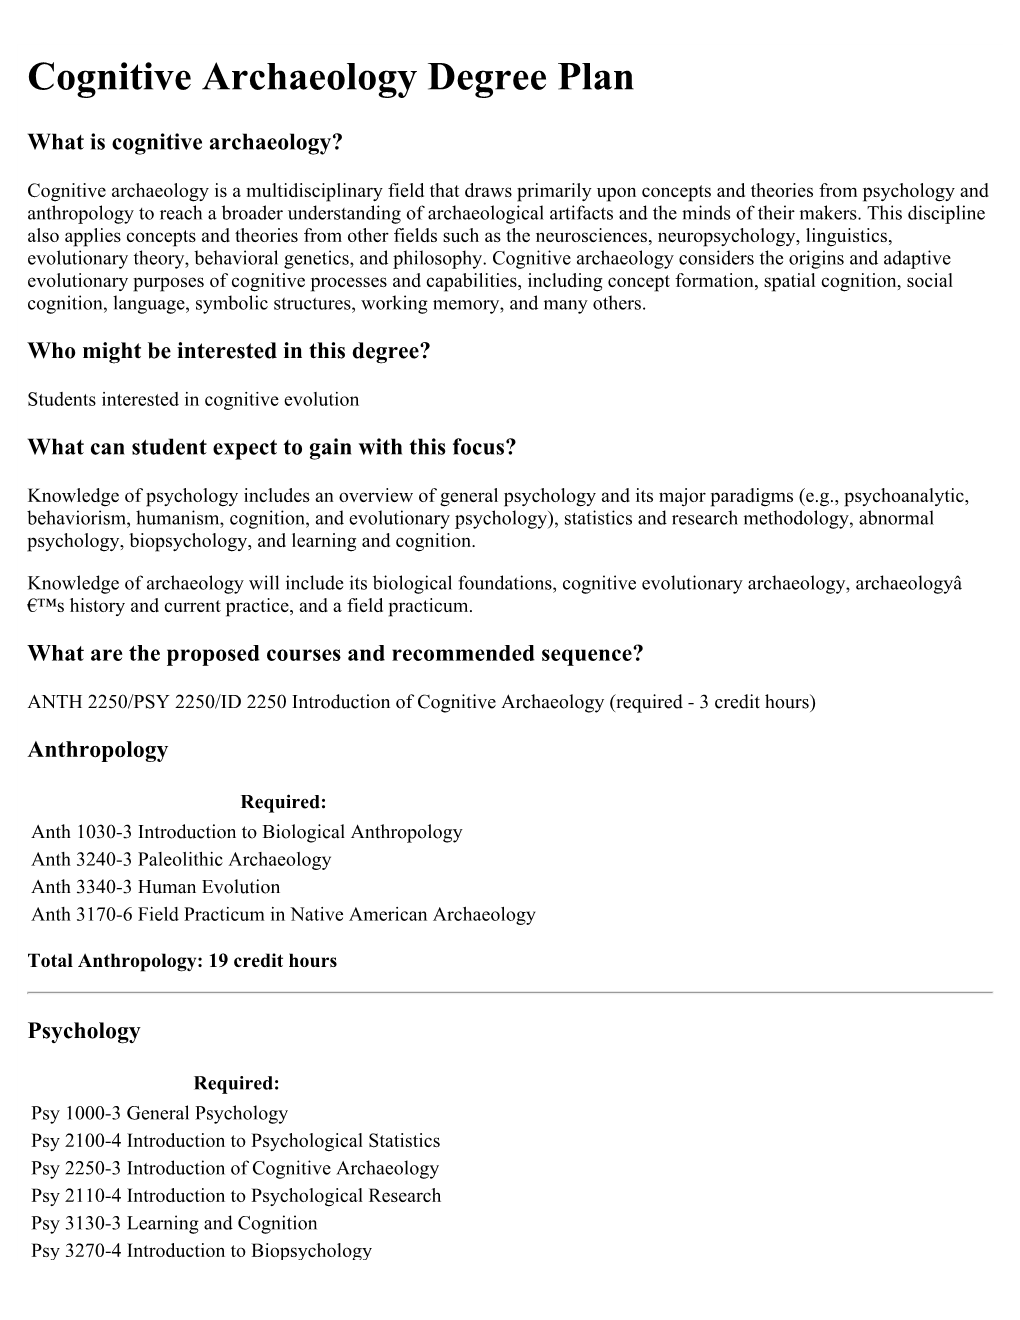 Cognitive Archaeology Degree Plan Download